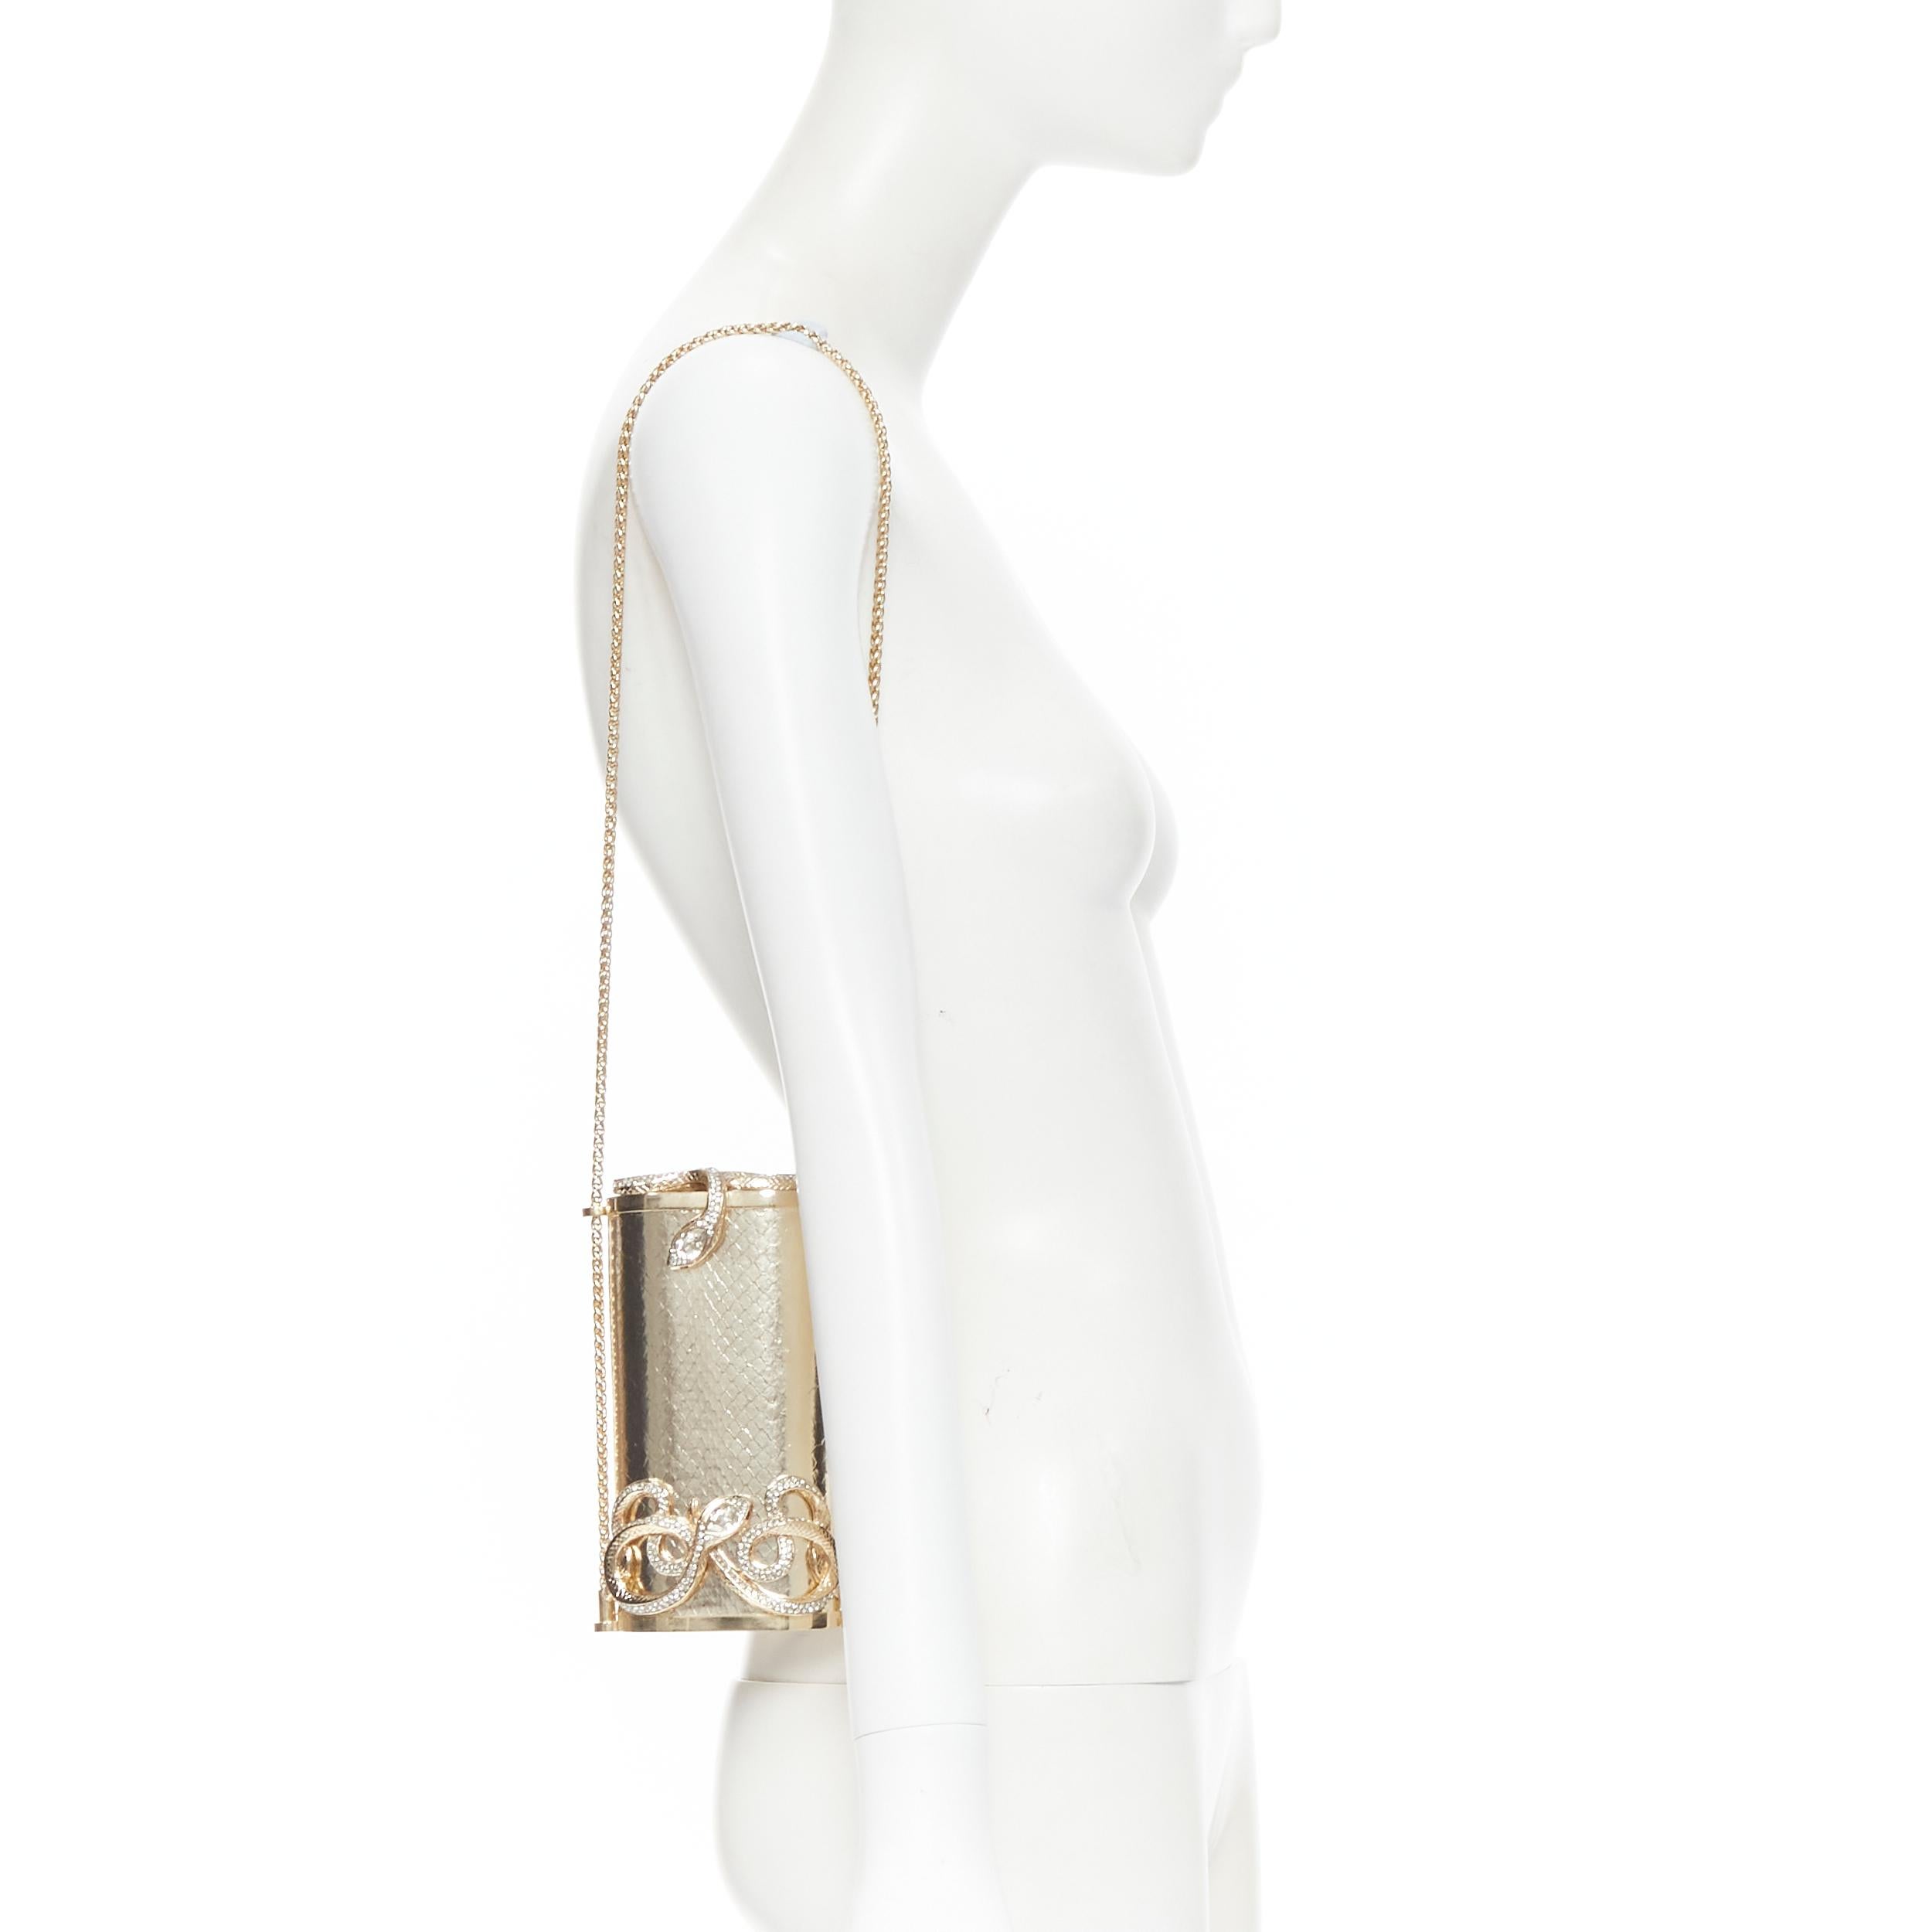 ROBERTO CAVALLI metallic gold leather crystal Serpent snake chain box clutch 
Reference: TGAS/B01438 
Brand: Roberto Cavalli 
Designer: Roberto Cavalli 
Model: Crossbody box clutch 
Material: Metal 
Color: Gold 
Pattern: Solid 
Closure: Clasp 
Extra